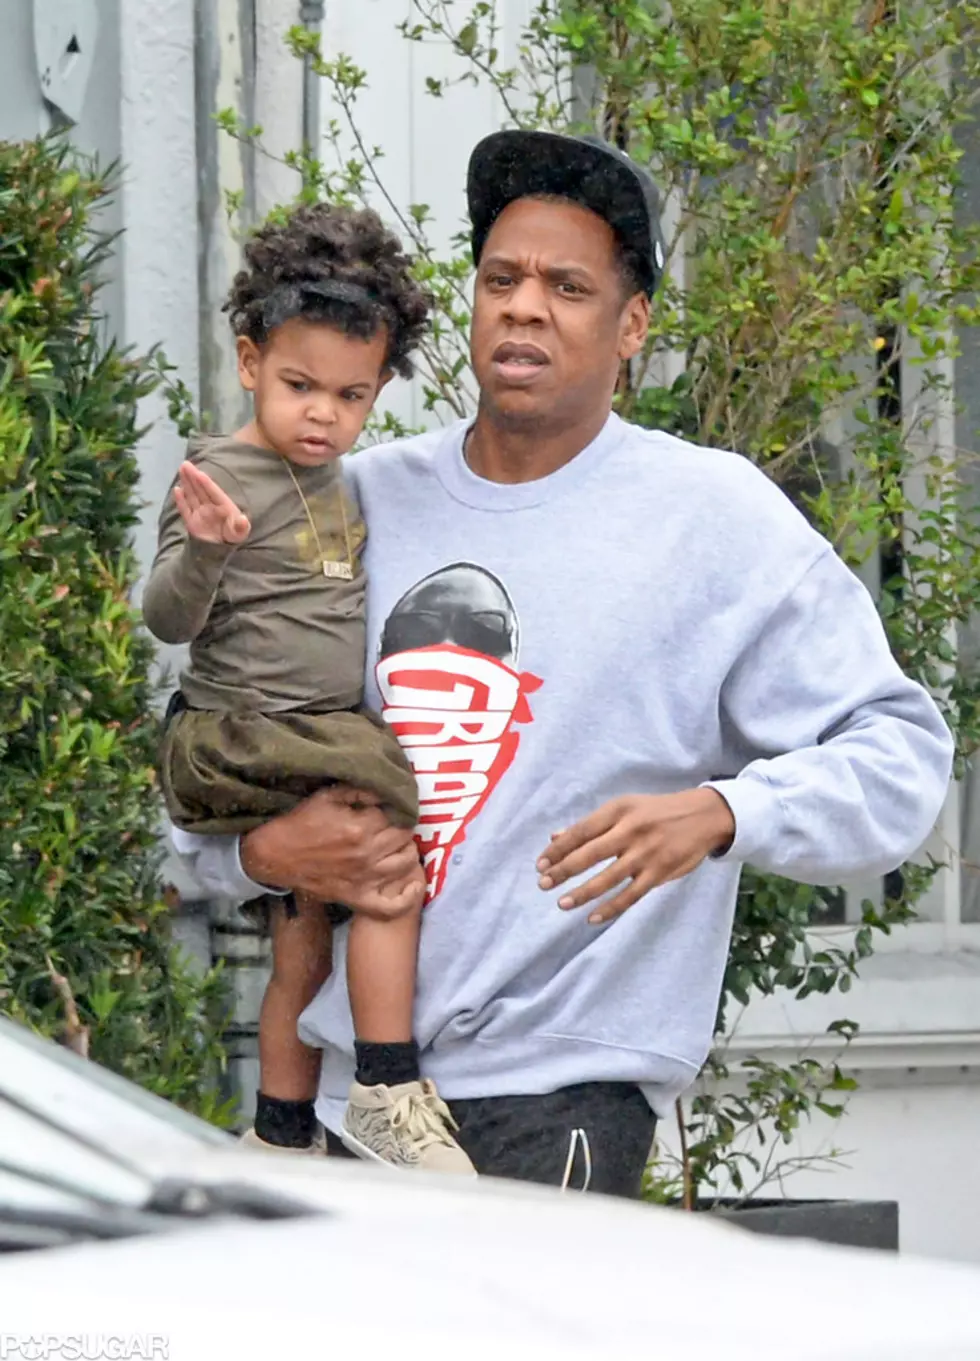 Petition Started To Comb Blue Ivy's Hair [Seriously]